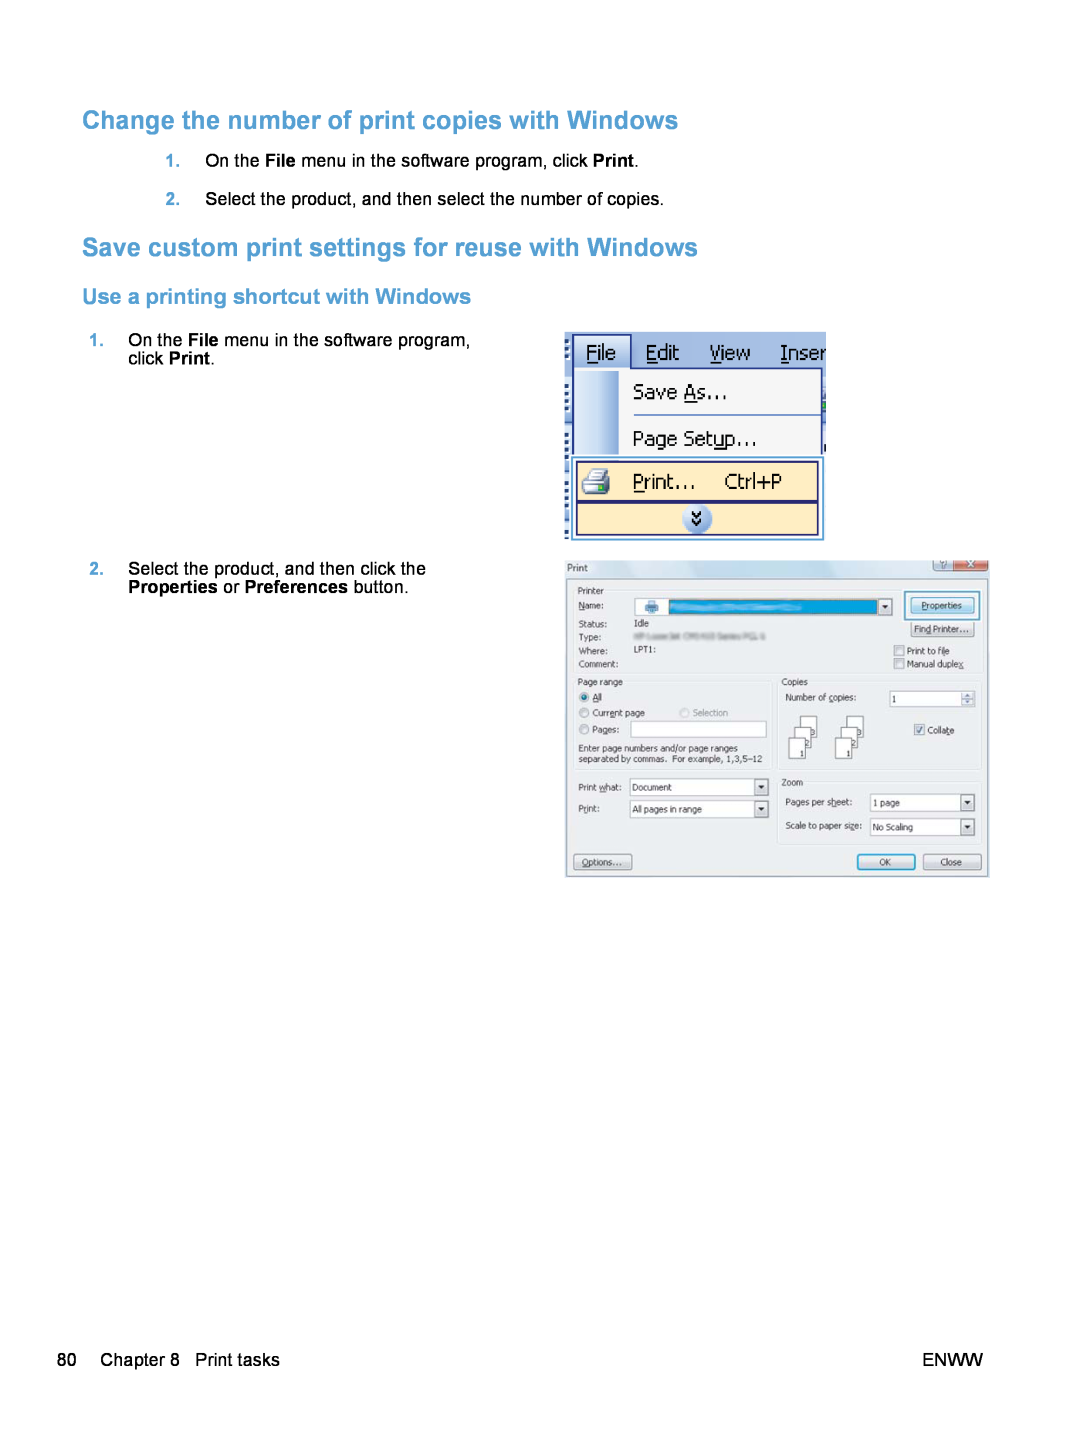 HP 100 COLOR MFP M175 Change the number of print copies with Windows, Save custom print settings for reuse with Windows 